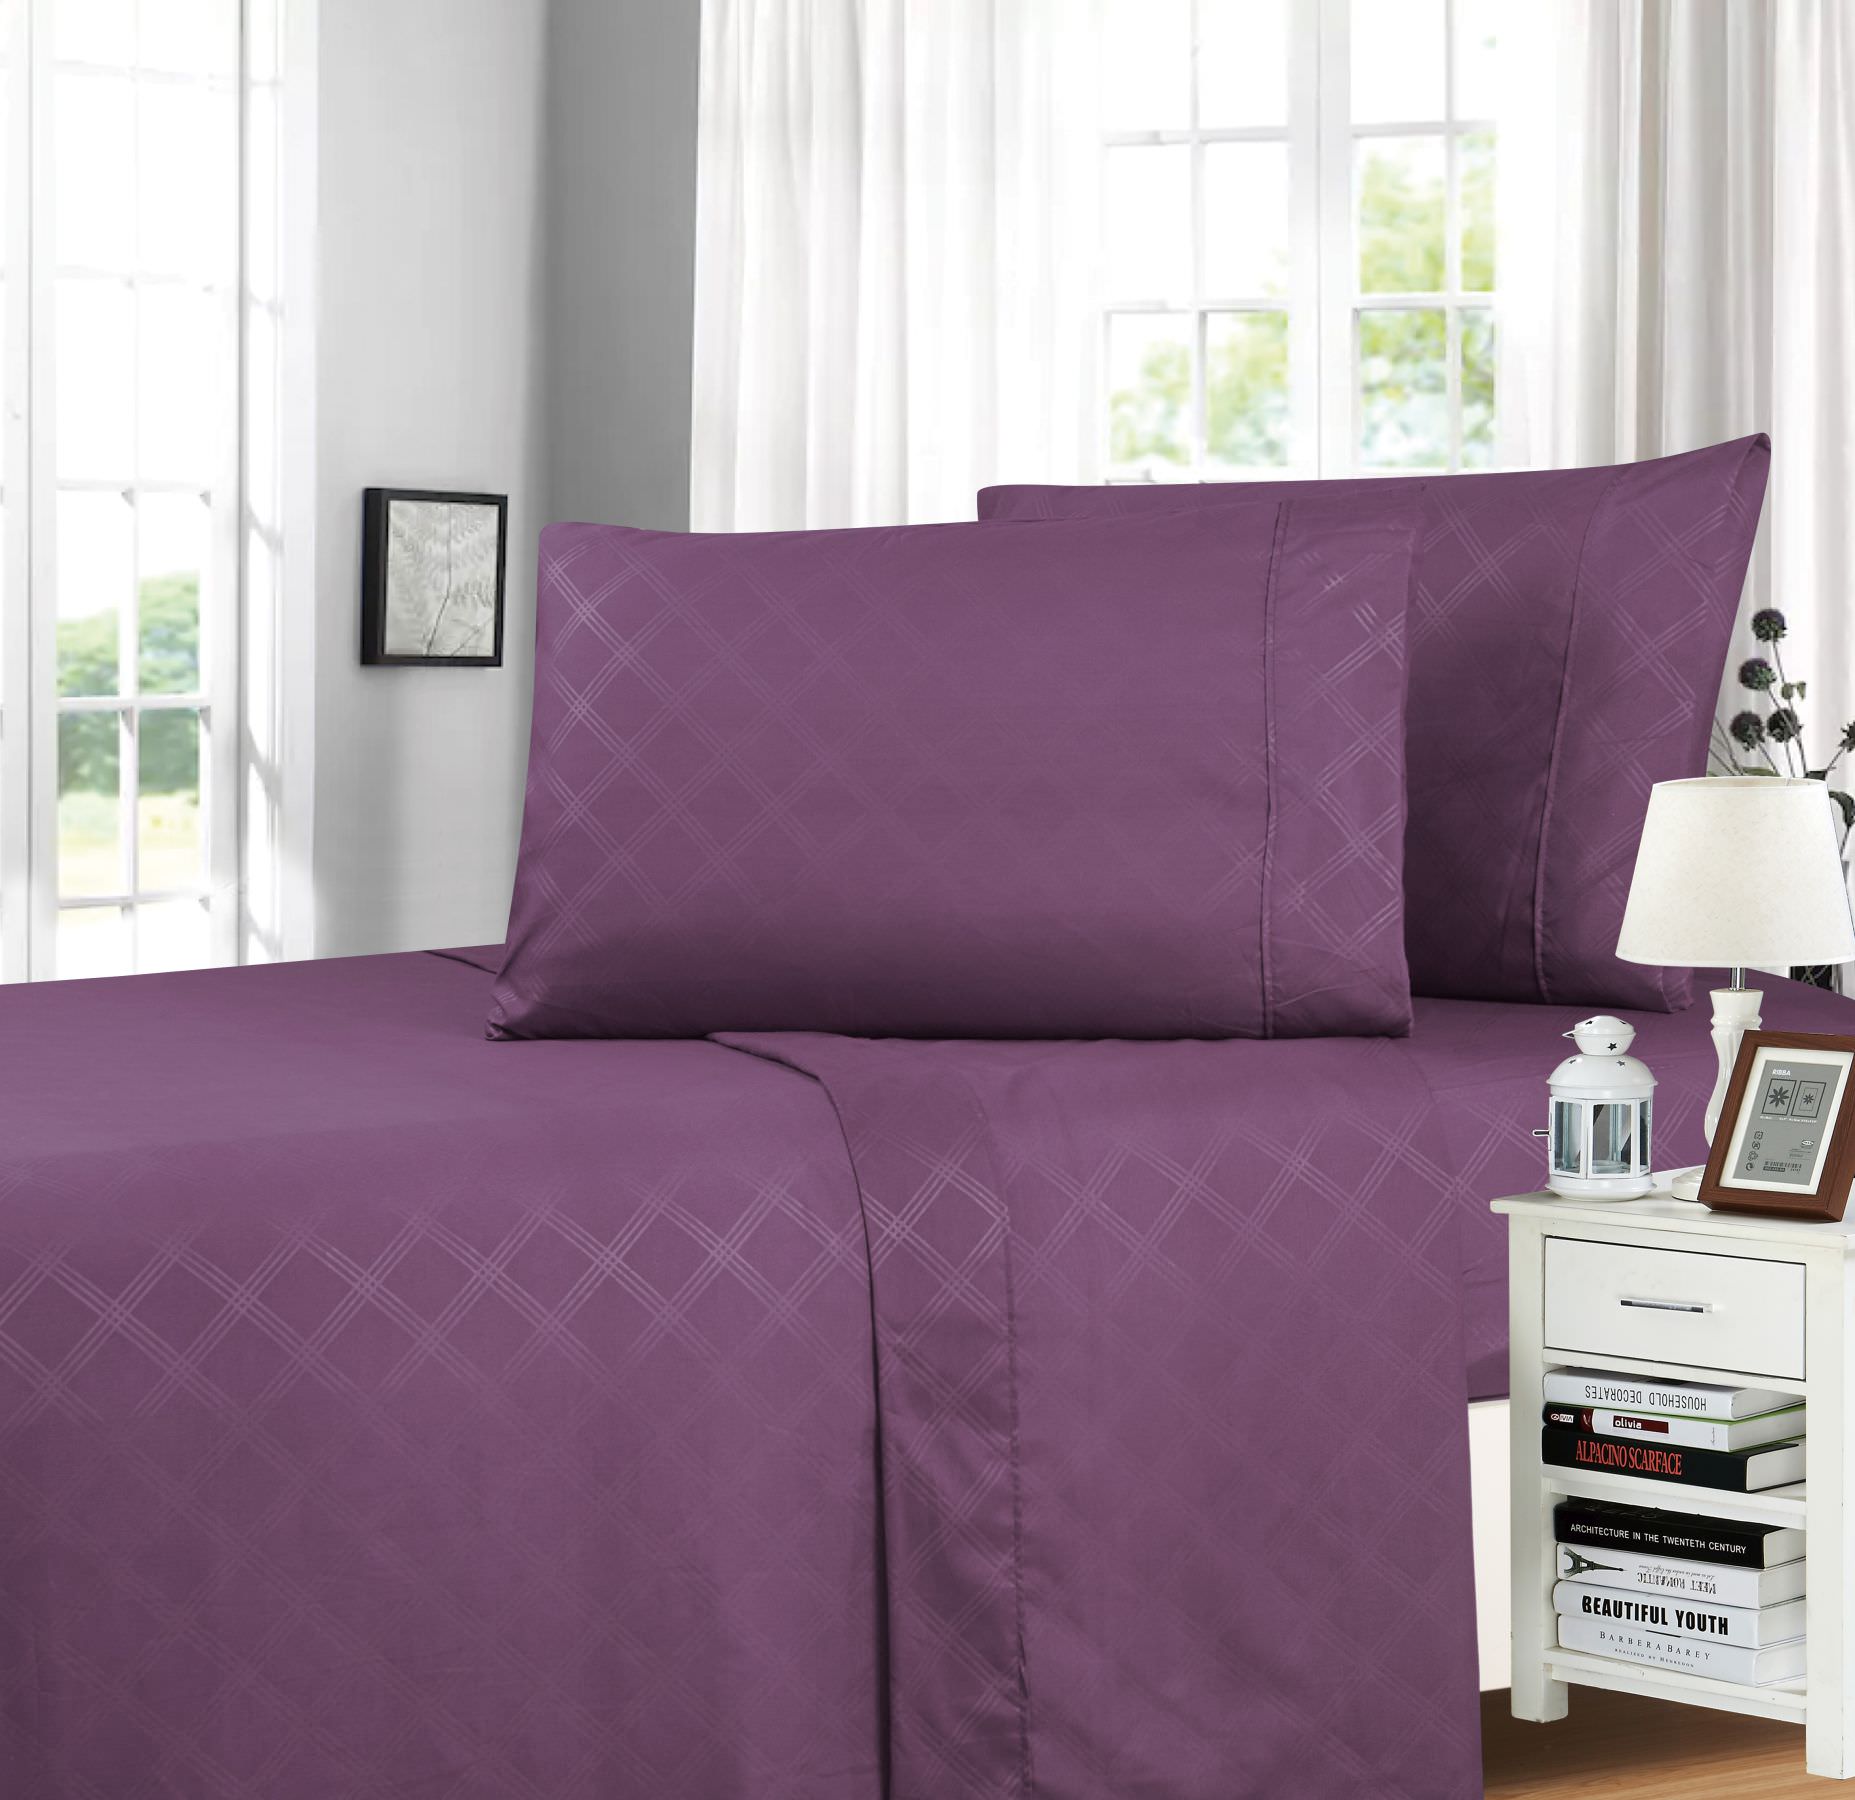 Simple Elegance by Ben&Jonah Queen Size Plaid Embossed 4 Piece Sheet Set - Purple - image 1 of 1